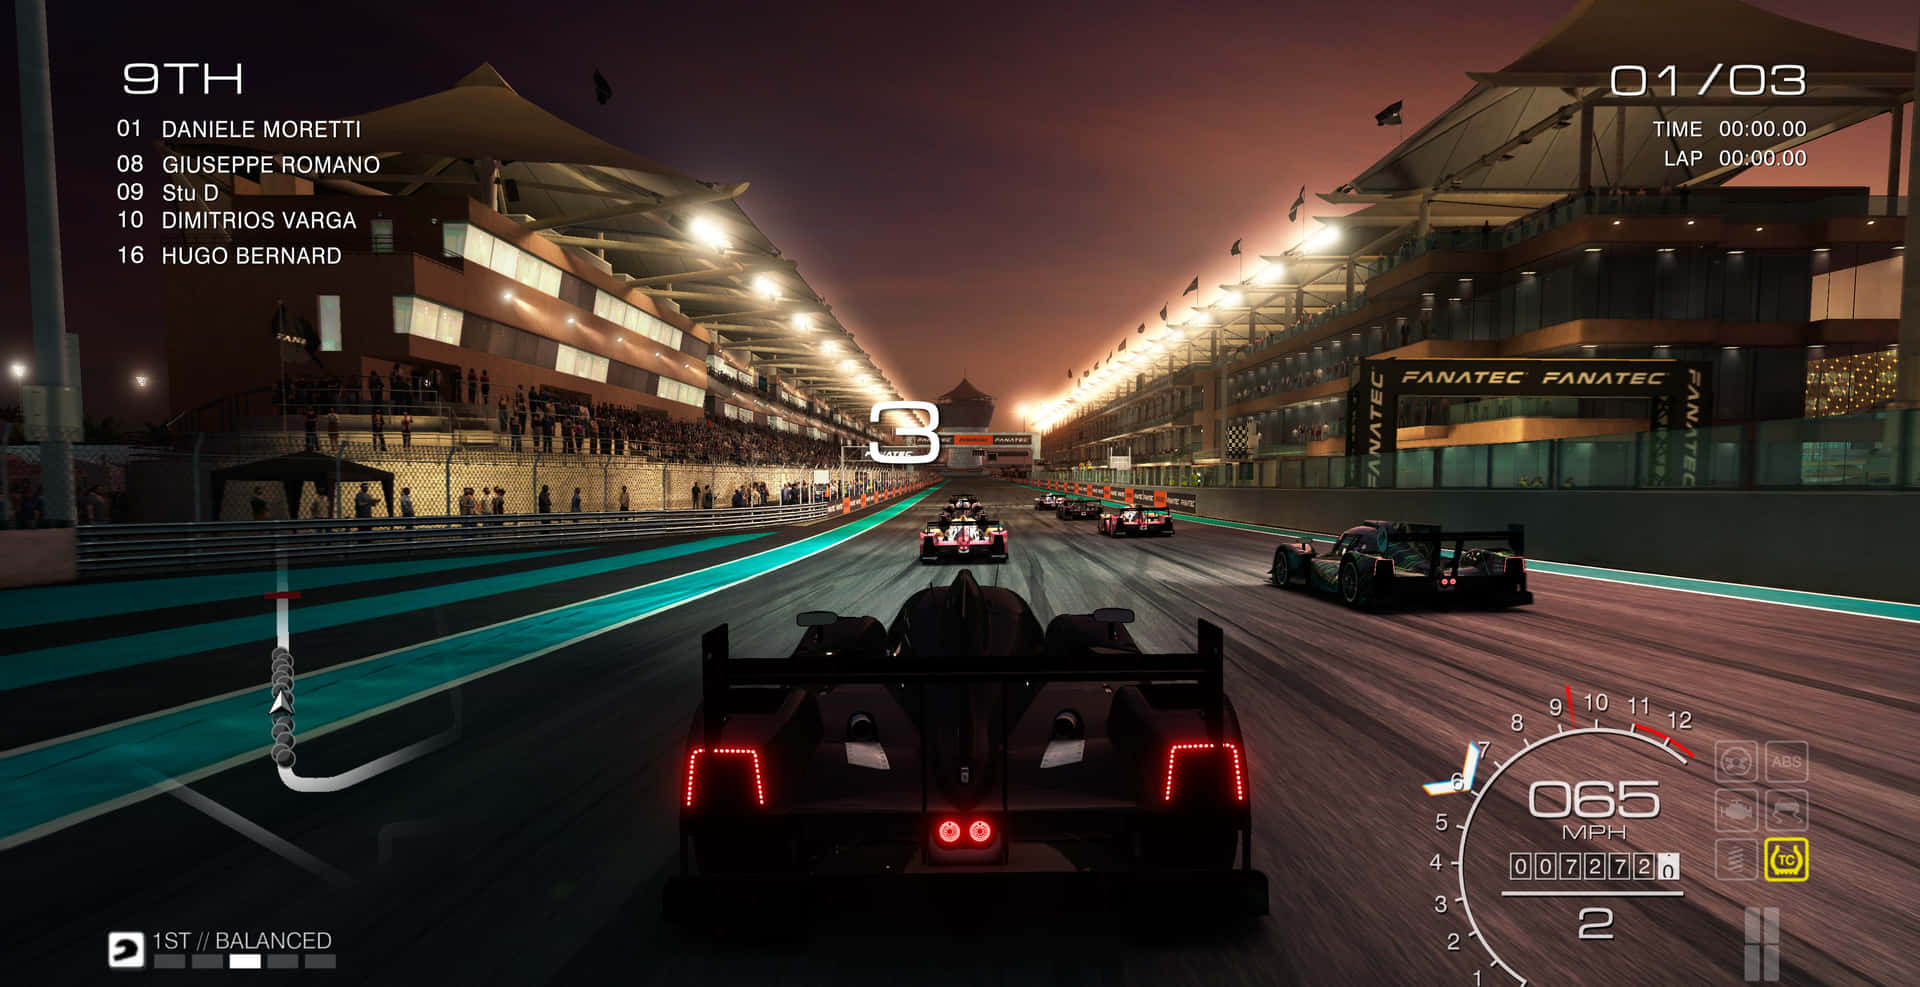 A Racing Game With Cars On The Track